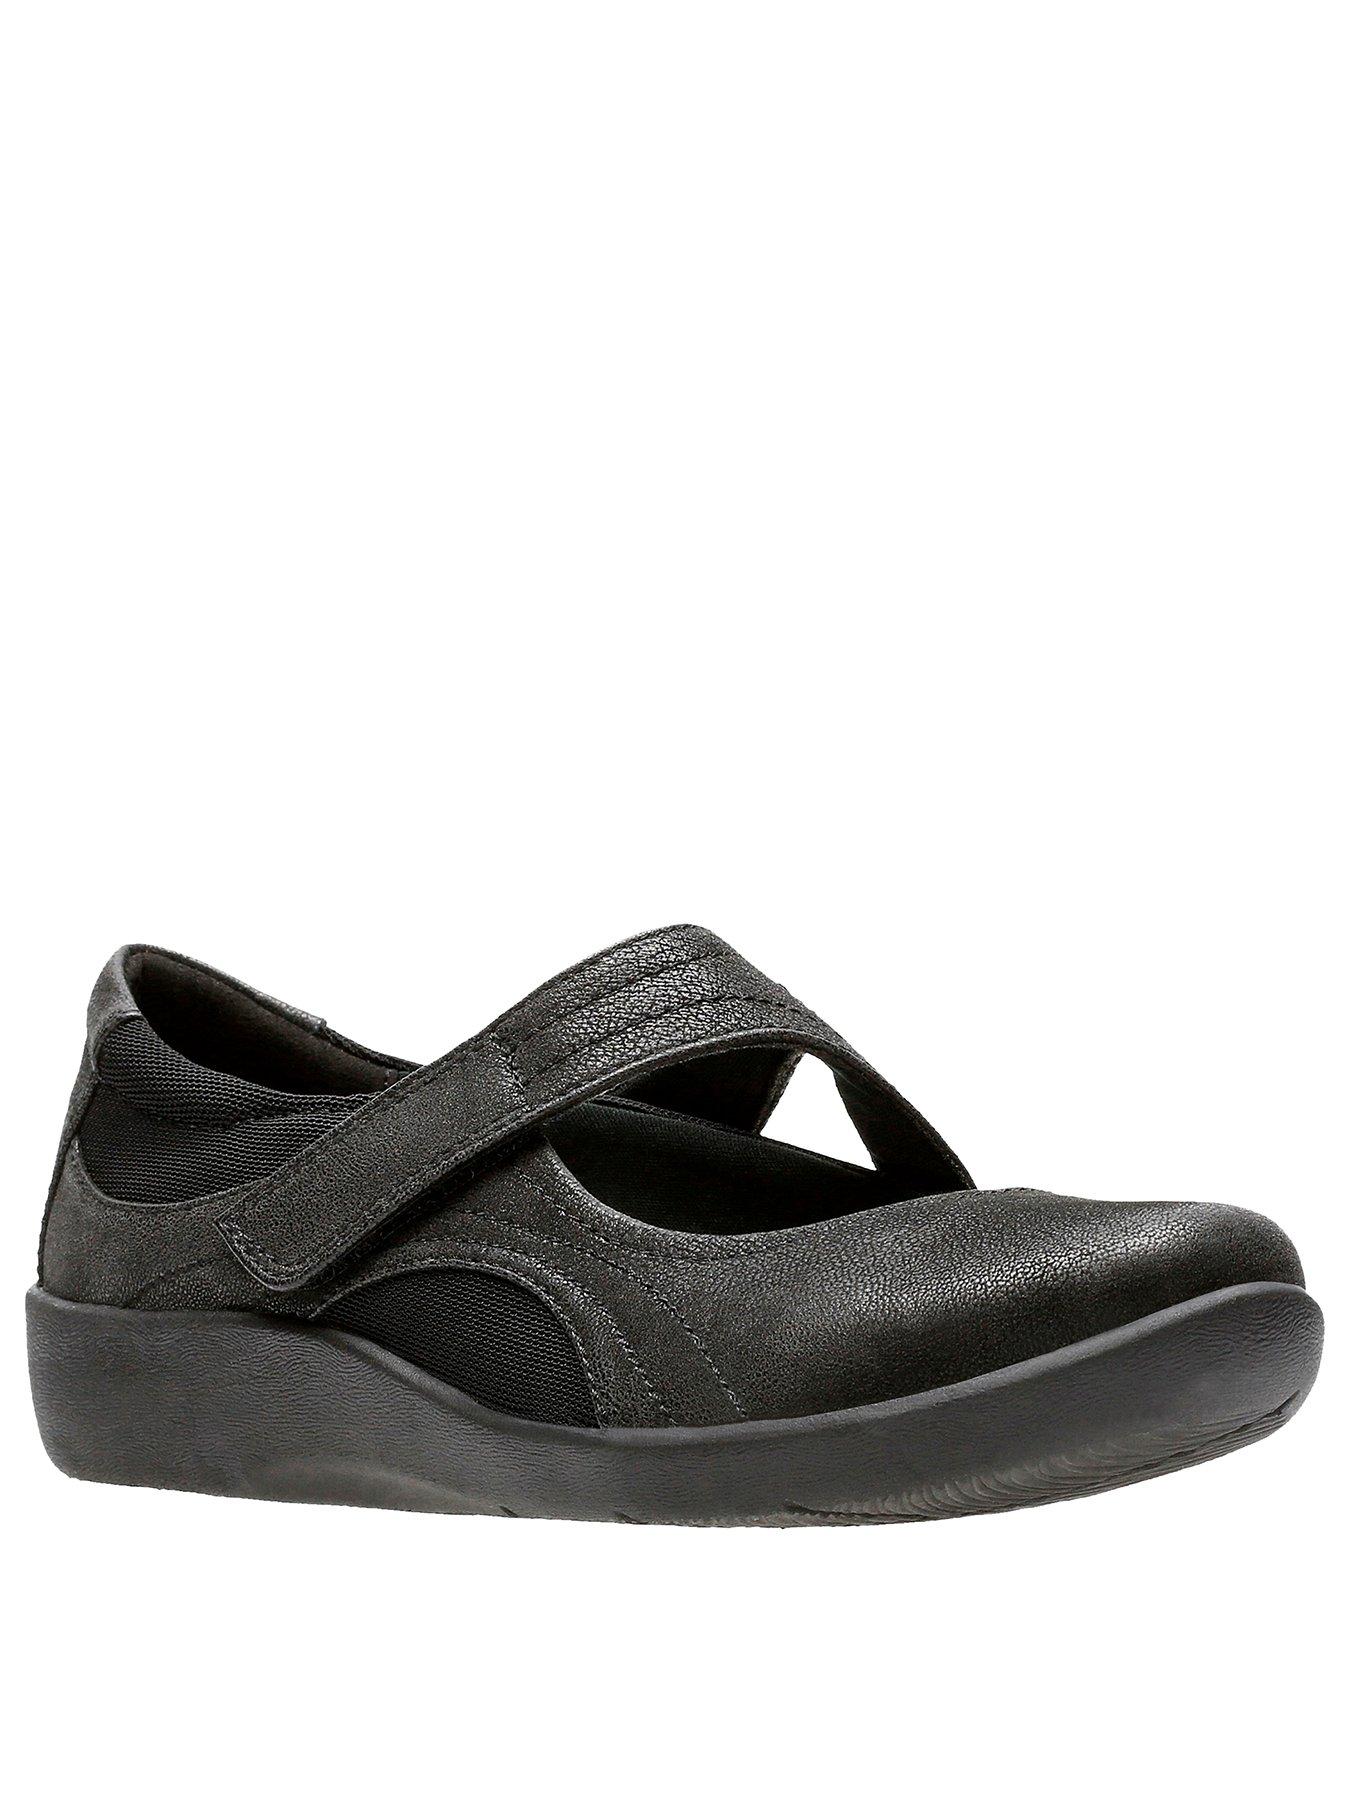 clarks ladies navy blue shoes